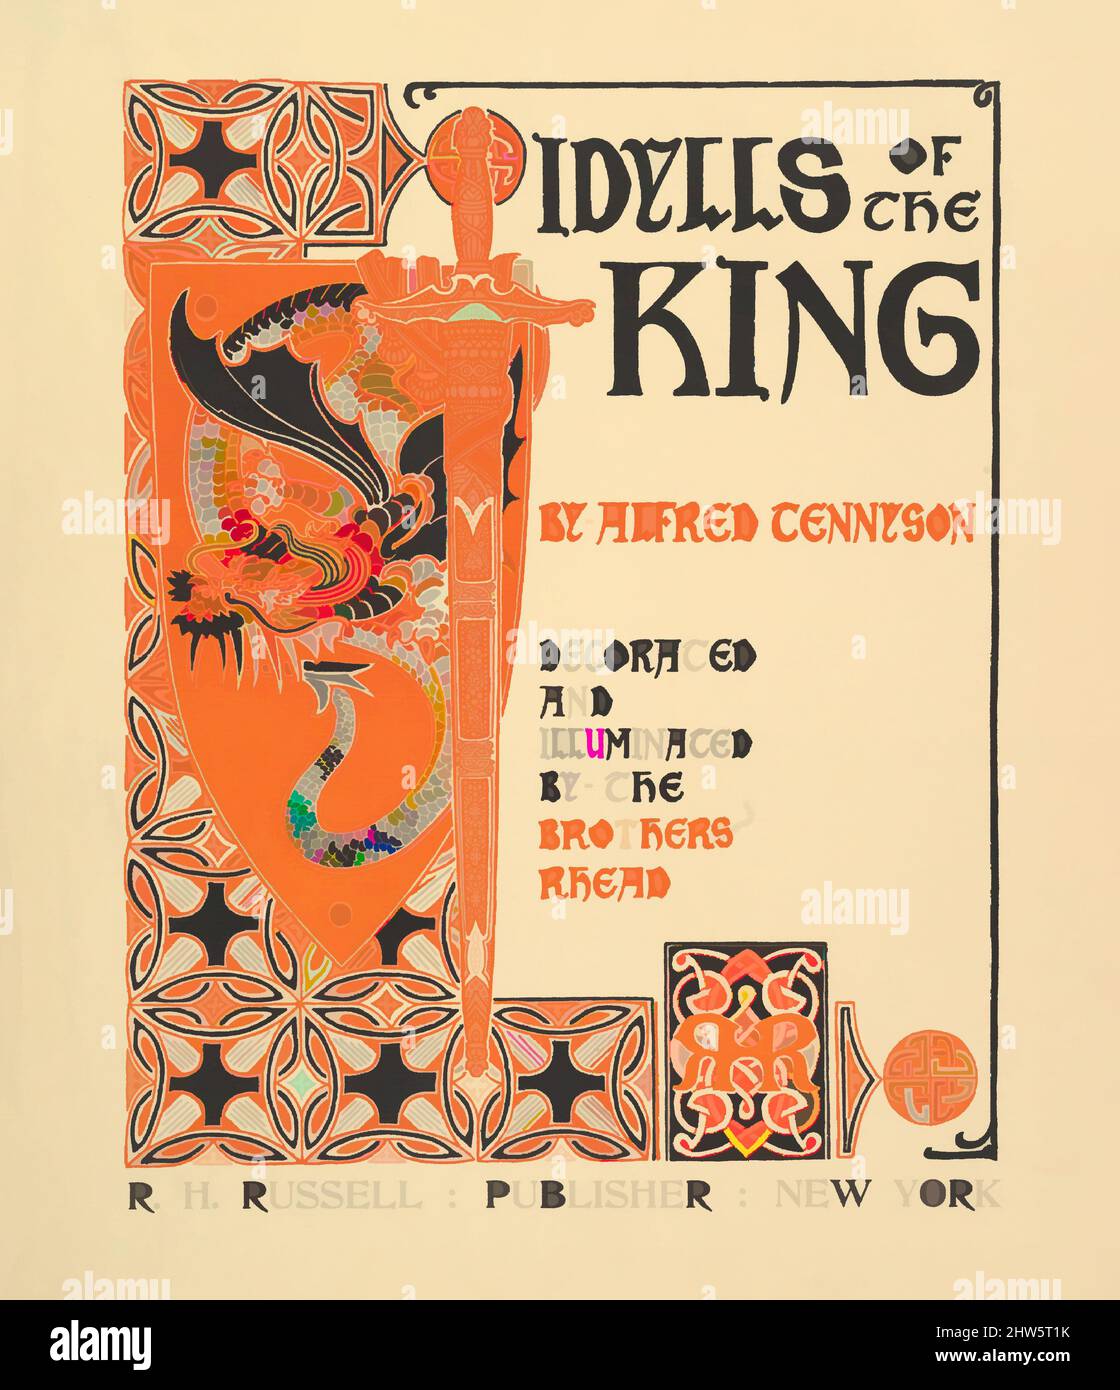 Art inspired by Idylls of the King by Alfred Tennyson, 1898, Commercial relief process and letterpress, Sheet: 14 9/16 × 12 1/2 in. (37 × 31.8 cm), Prints, Louis John Rhead (American, born England, 1857–1926, Classic works modernized by Artotop with a splash of modernity. Shapes, color and value, eye-catching visual impact on art. Emotions through freedom of artworks in a contemporary way. A timeless message pursuing a wildly creative new direction. Artists turning to the digital medium and creating the Artotop NFT Stock Photo